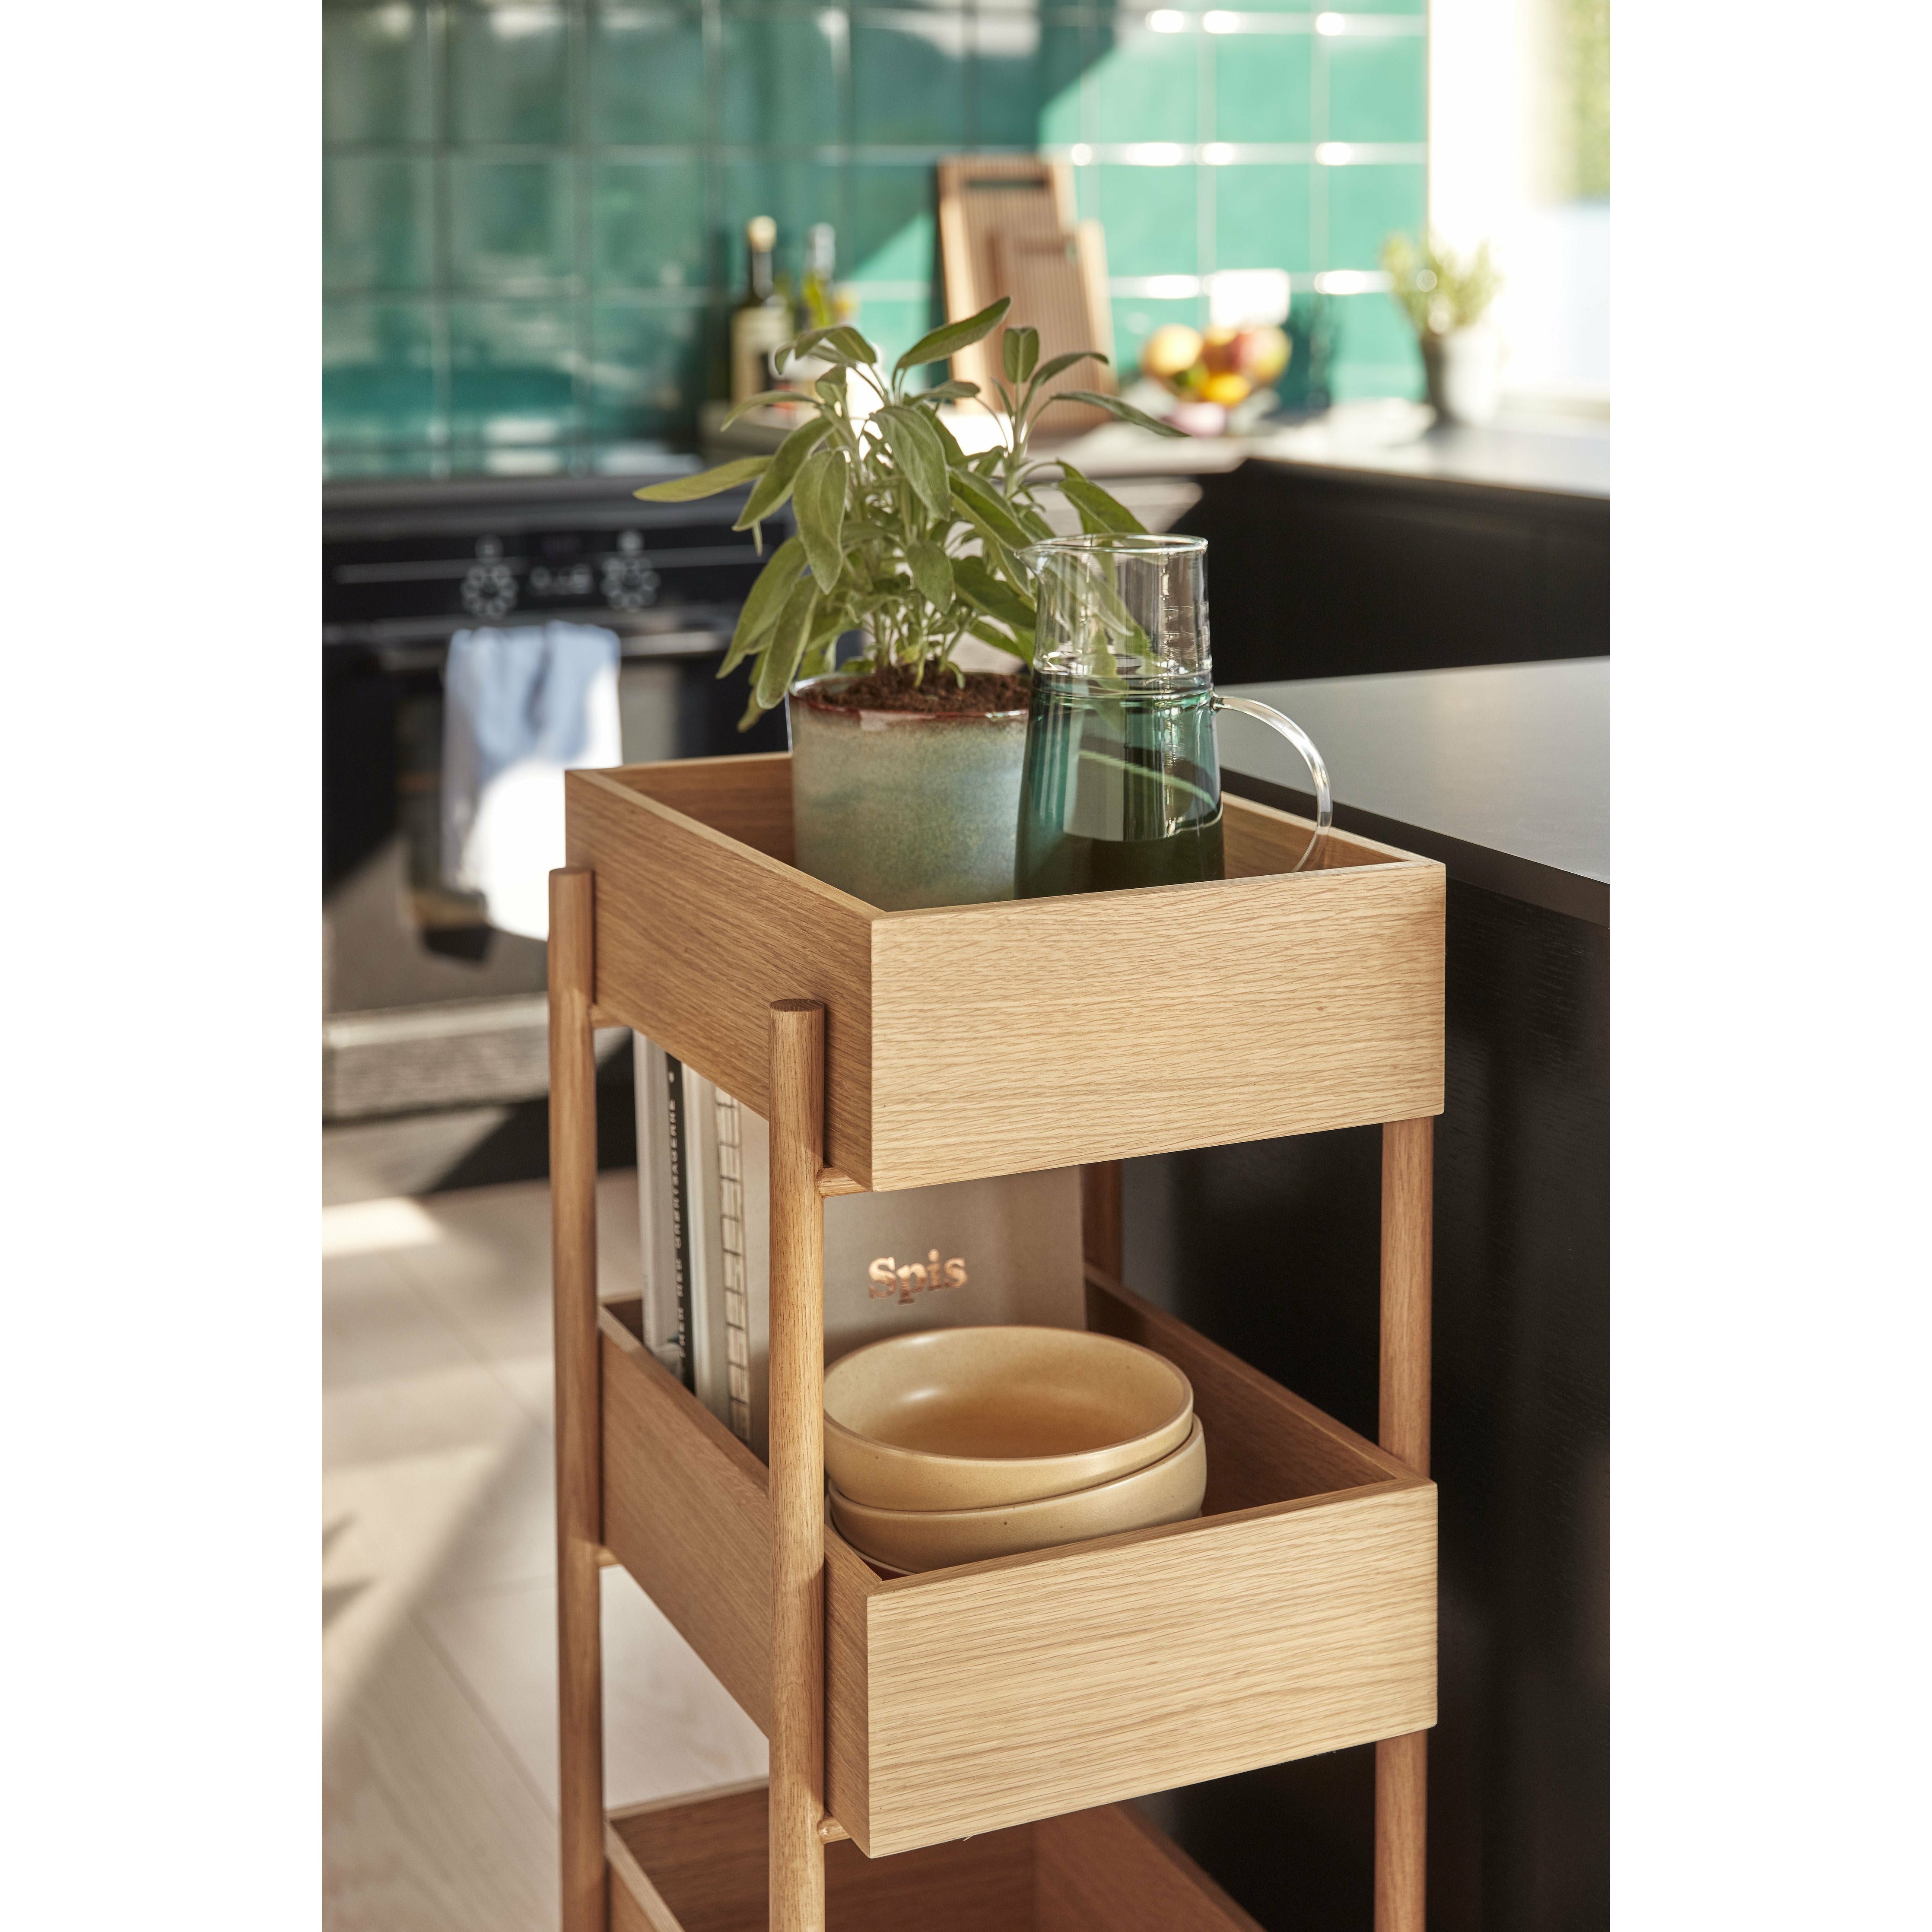 Hübsch Stack Console Table